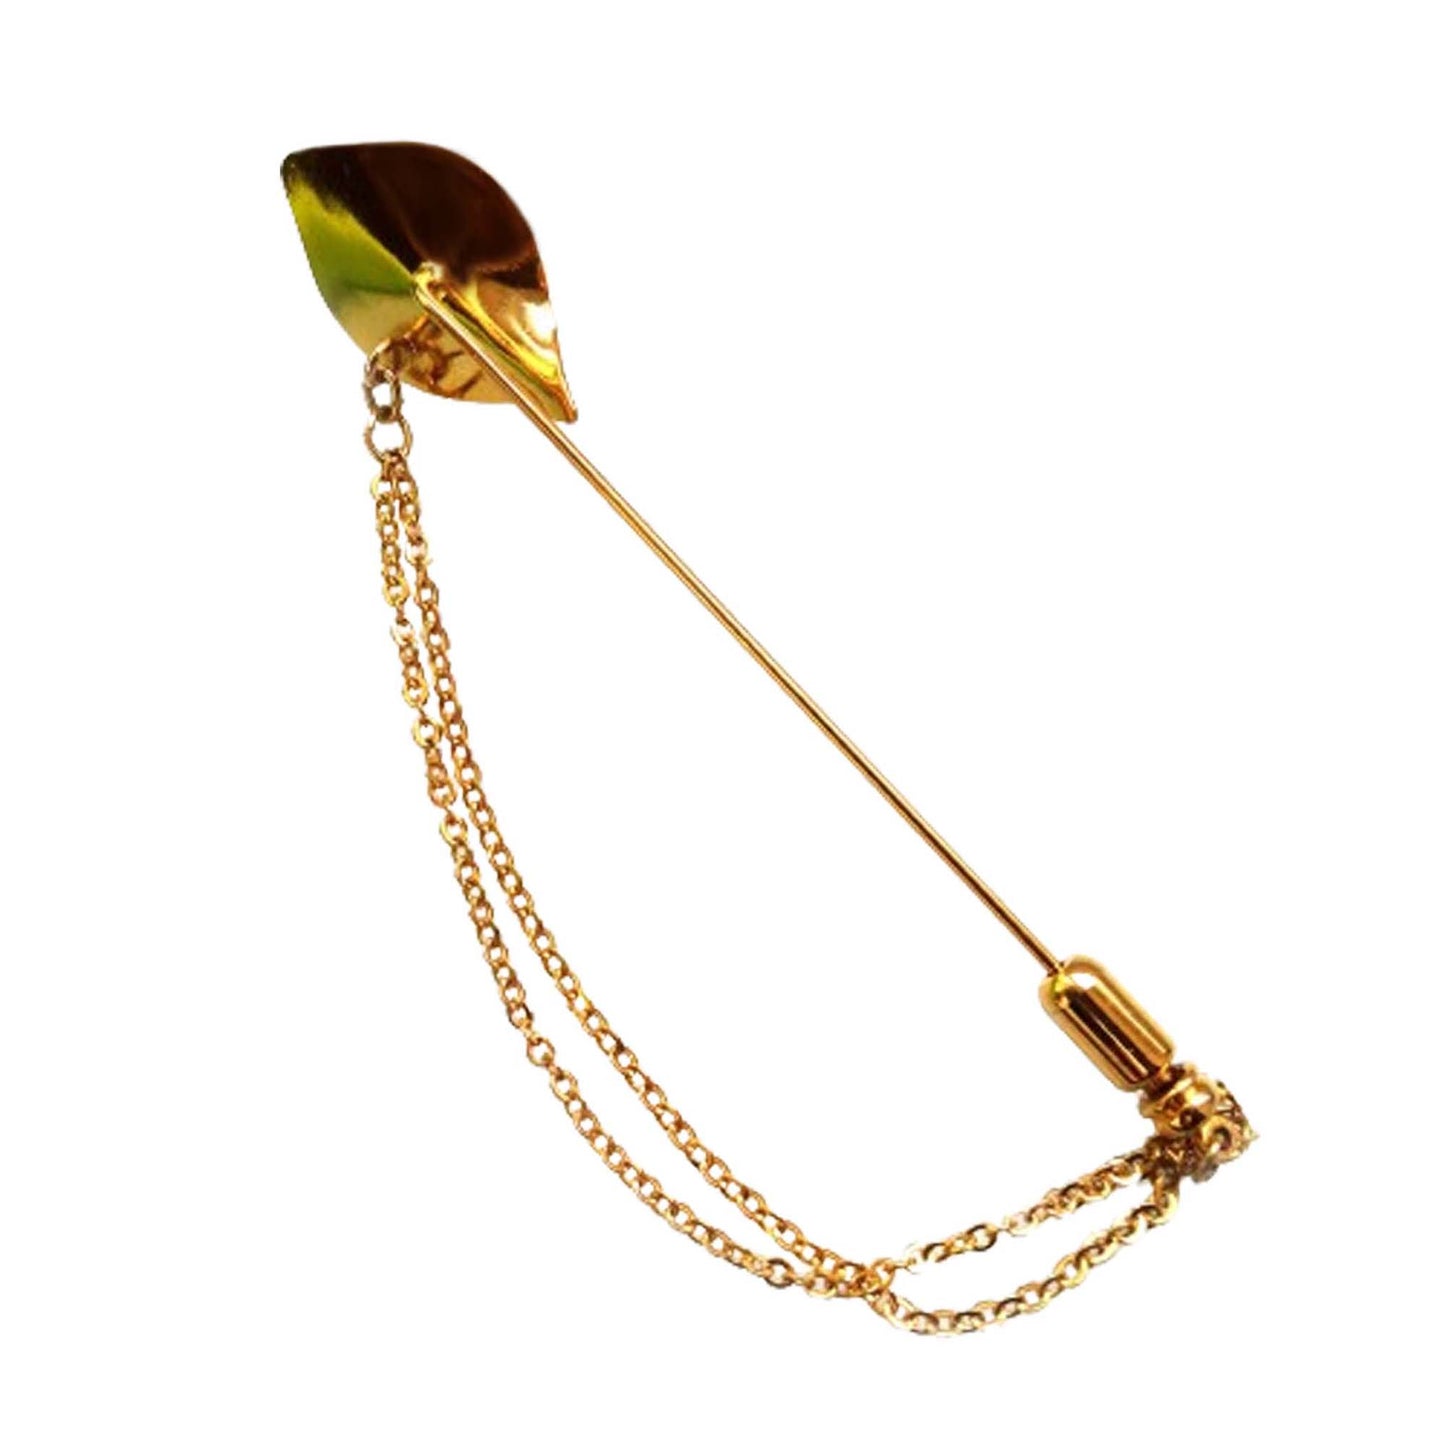 Akoya Pearl Stick Pin with Chain, Gold Plated Vintage Jewelry